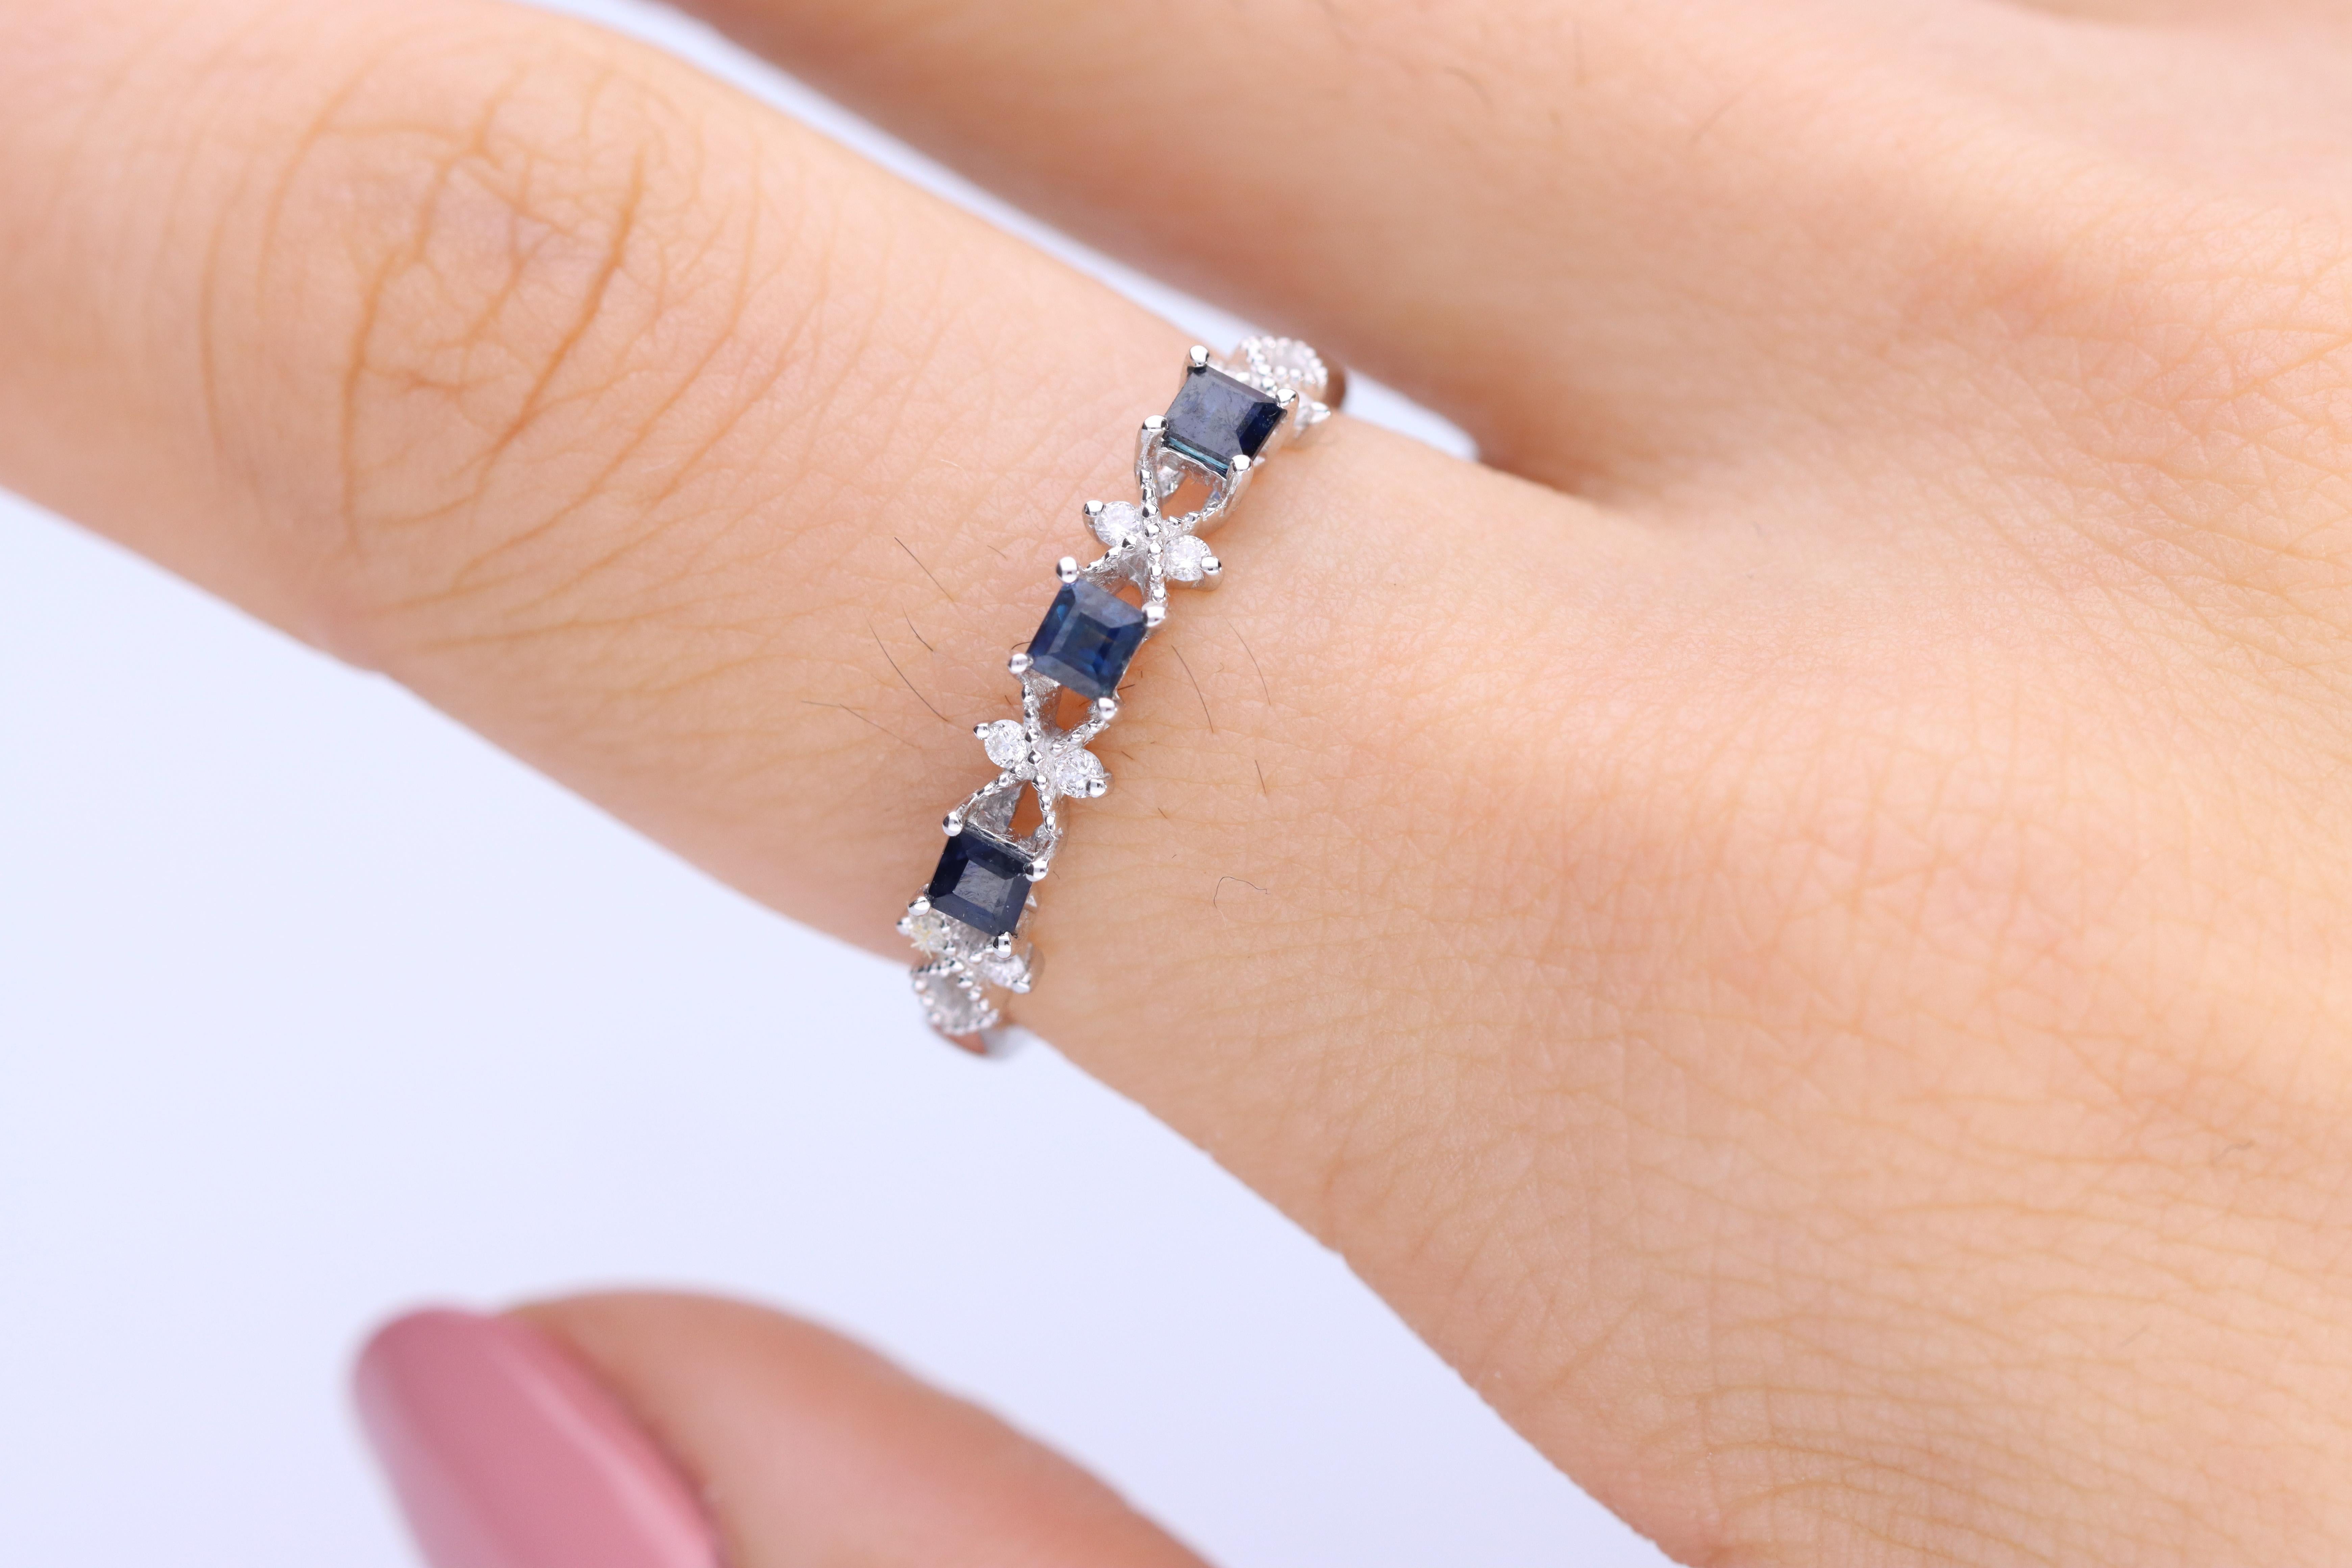 Stunning, timeless and classy eternity Unique Ring. Decorate yourself in luxury with this Gin & Grace Ring. The 18k White Gold jewelry boasts Square Cut Prong Setting Genuine Blue Sapphire (3 pcs) 0.38 Carat, along with Natural Round cut white